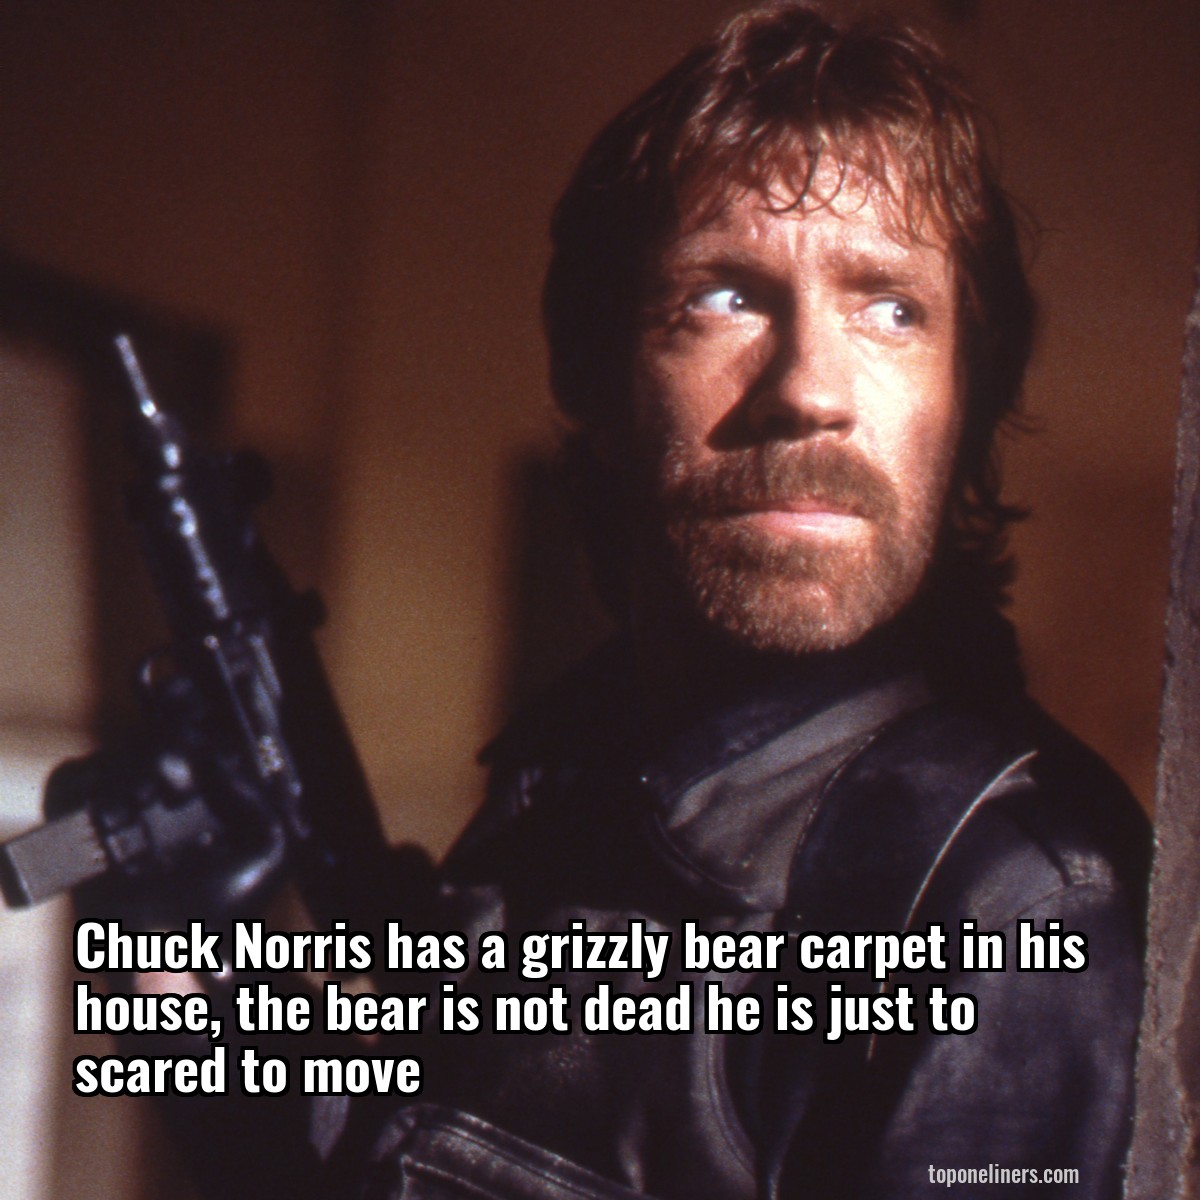 Chuck Norris has a grizzly bear carpet in his house, the bear is not dead he is just to scared to move